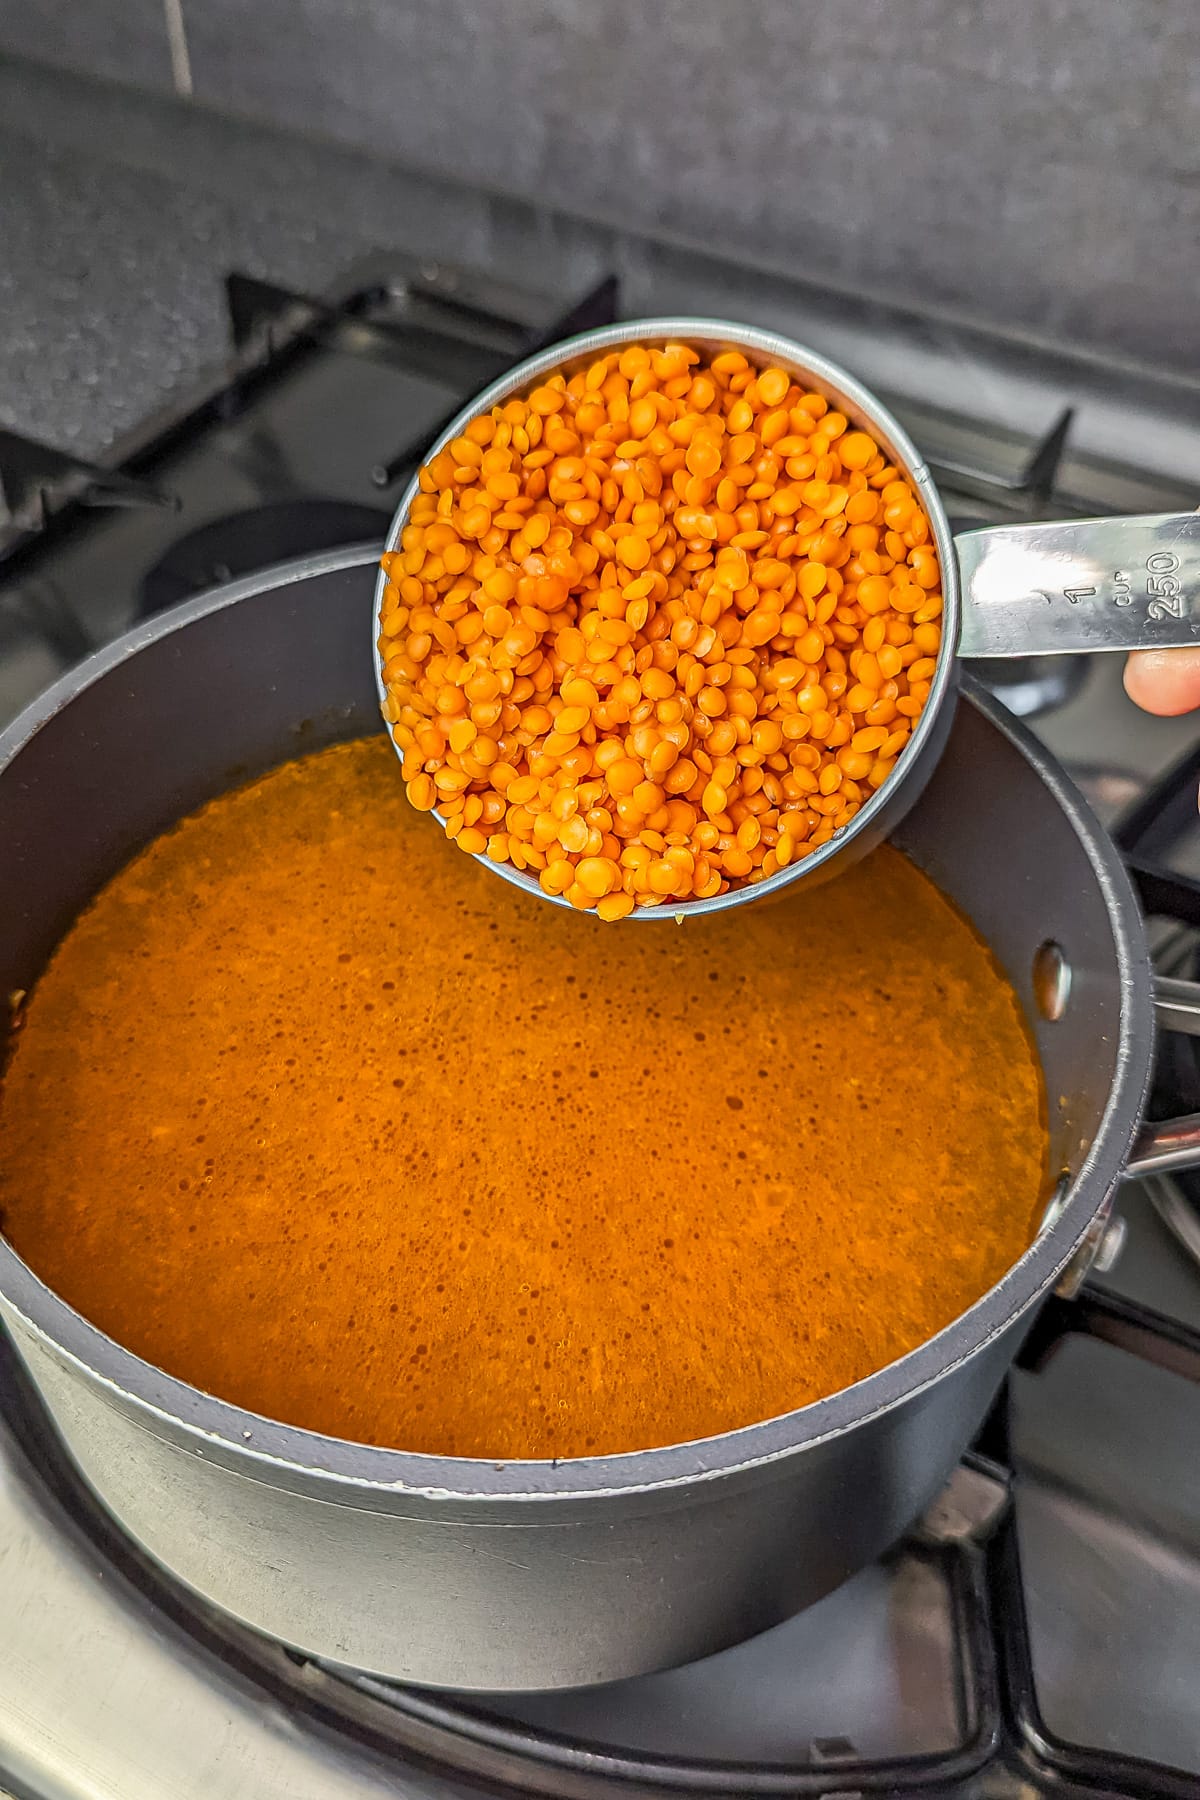 Dry red lentils added to the spiced broth in the cooking pot.